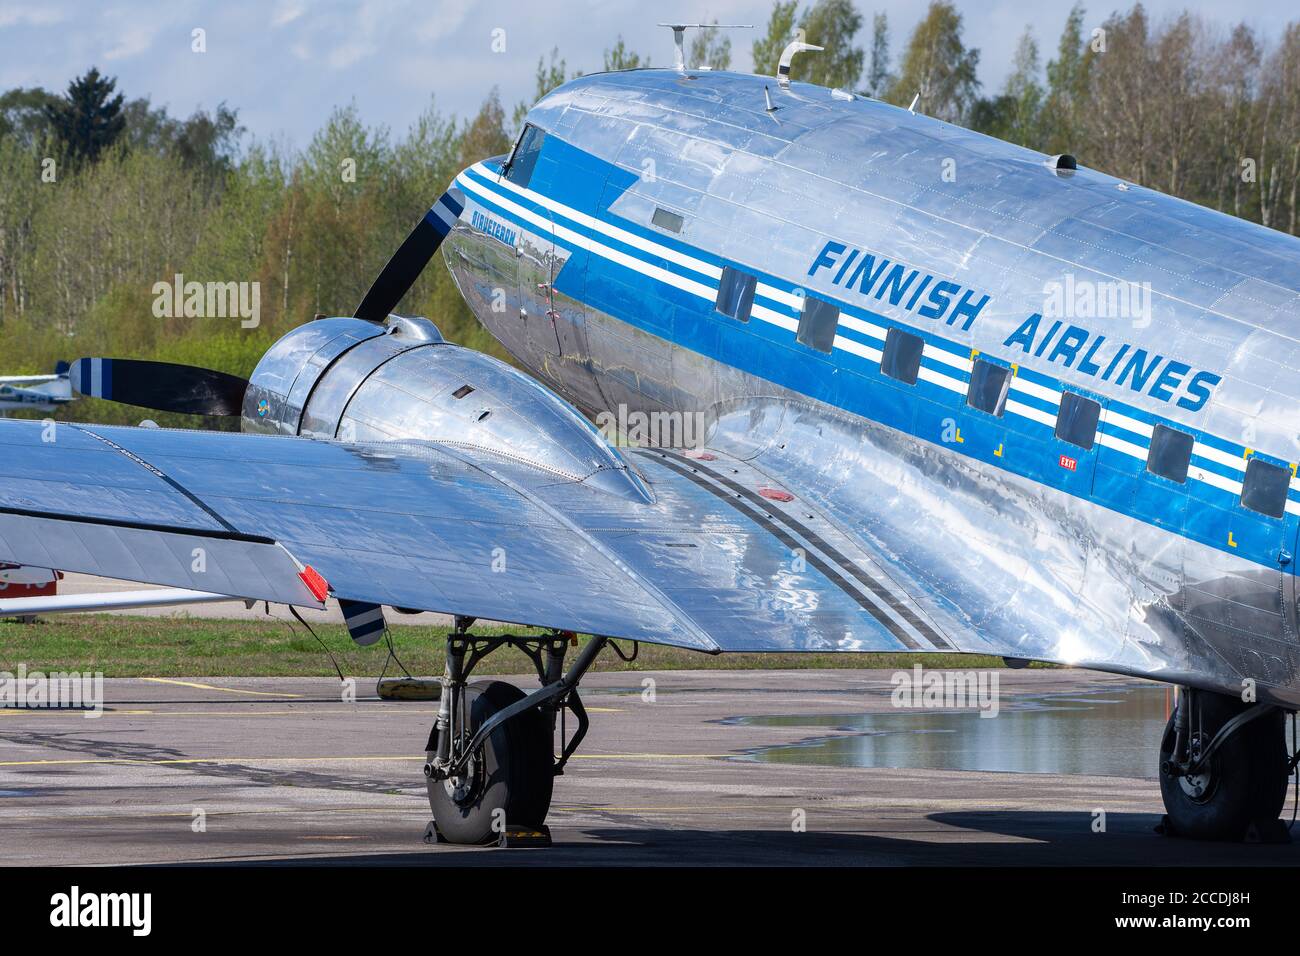 Helsinki / Finland - May 12, 2019: OH-LCH, Aero Oy Douglas DC-3 museum airplane operated by DC Association Finland parked at Helsinki-Malmi Airport. Stock Photo